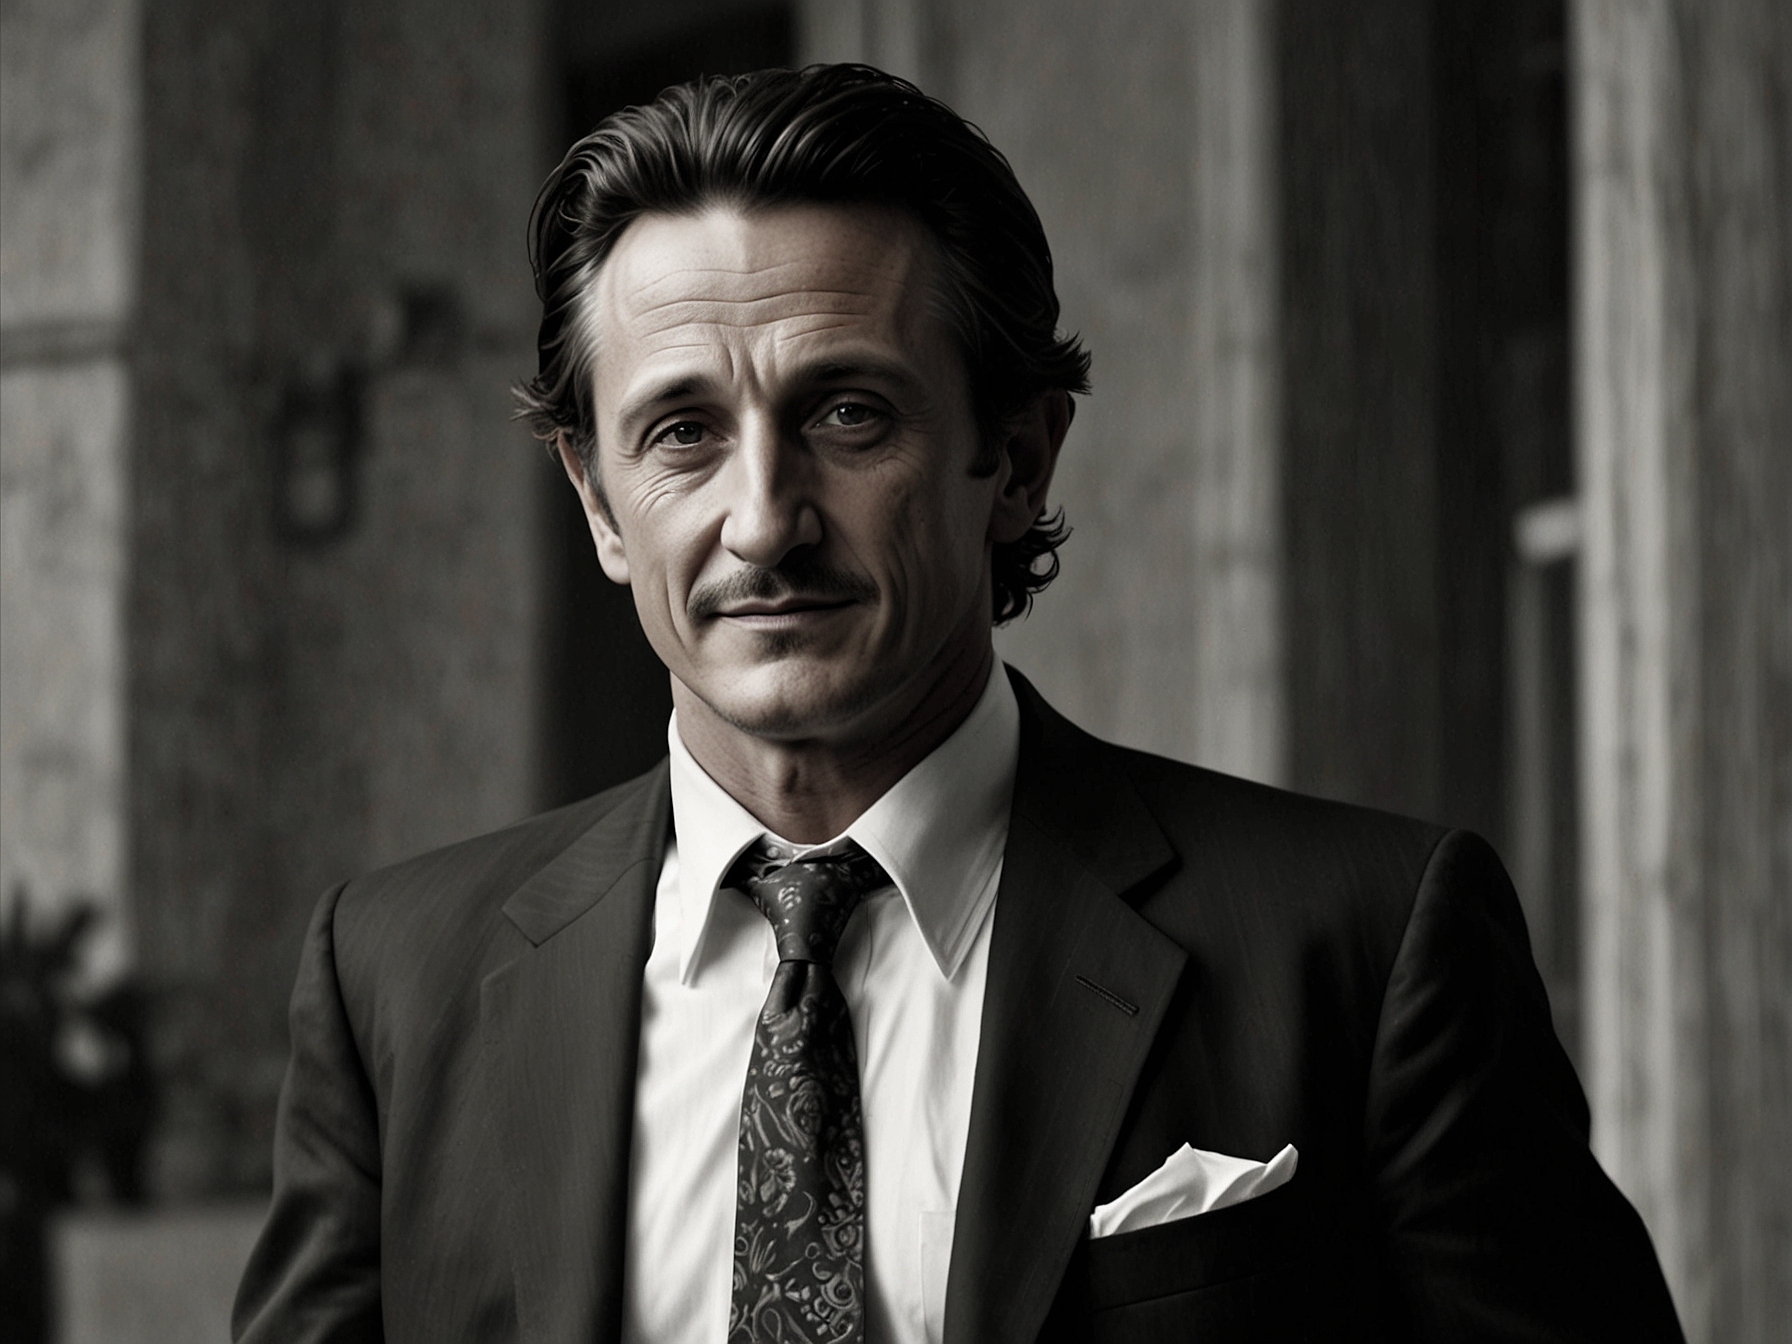 Sean Penn as Harvey Milk in the 2008 film 'Milk,' where he gave a career-defining performance as the first openly gay elected public official in California.